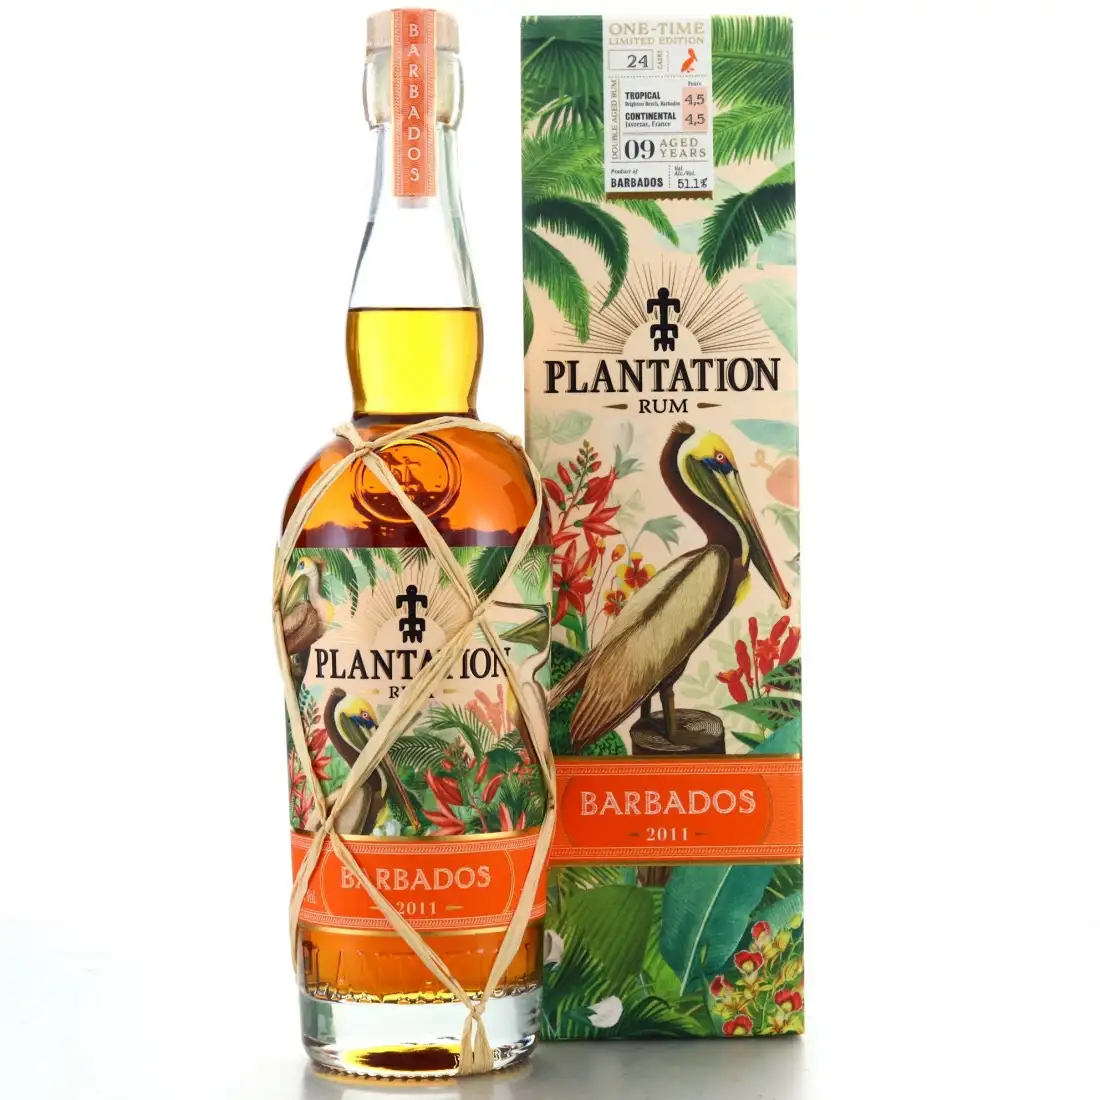 Image of the front of the bottle of the rum Plantation One-Time Limited Edition